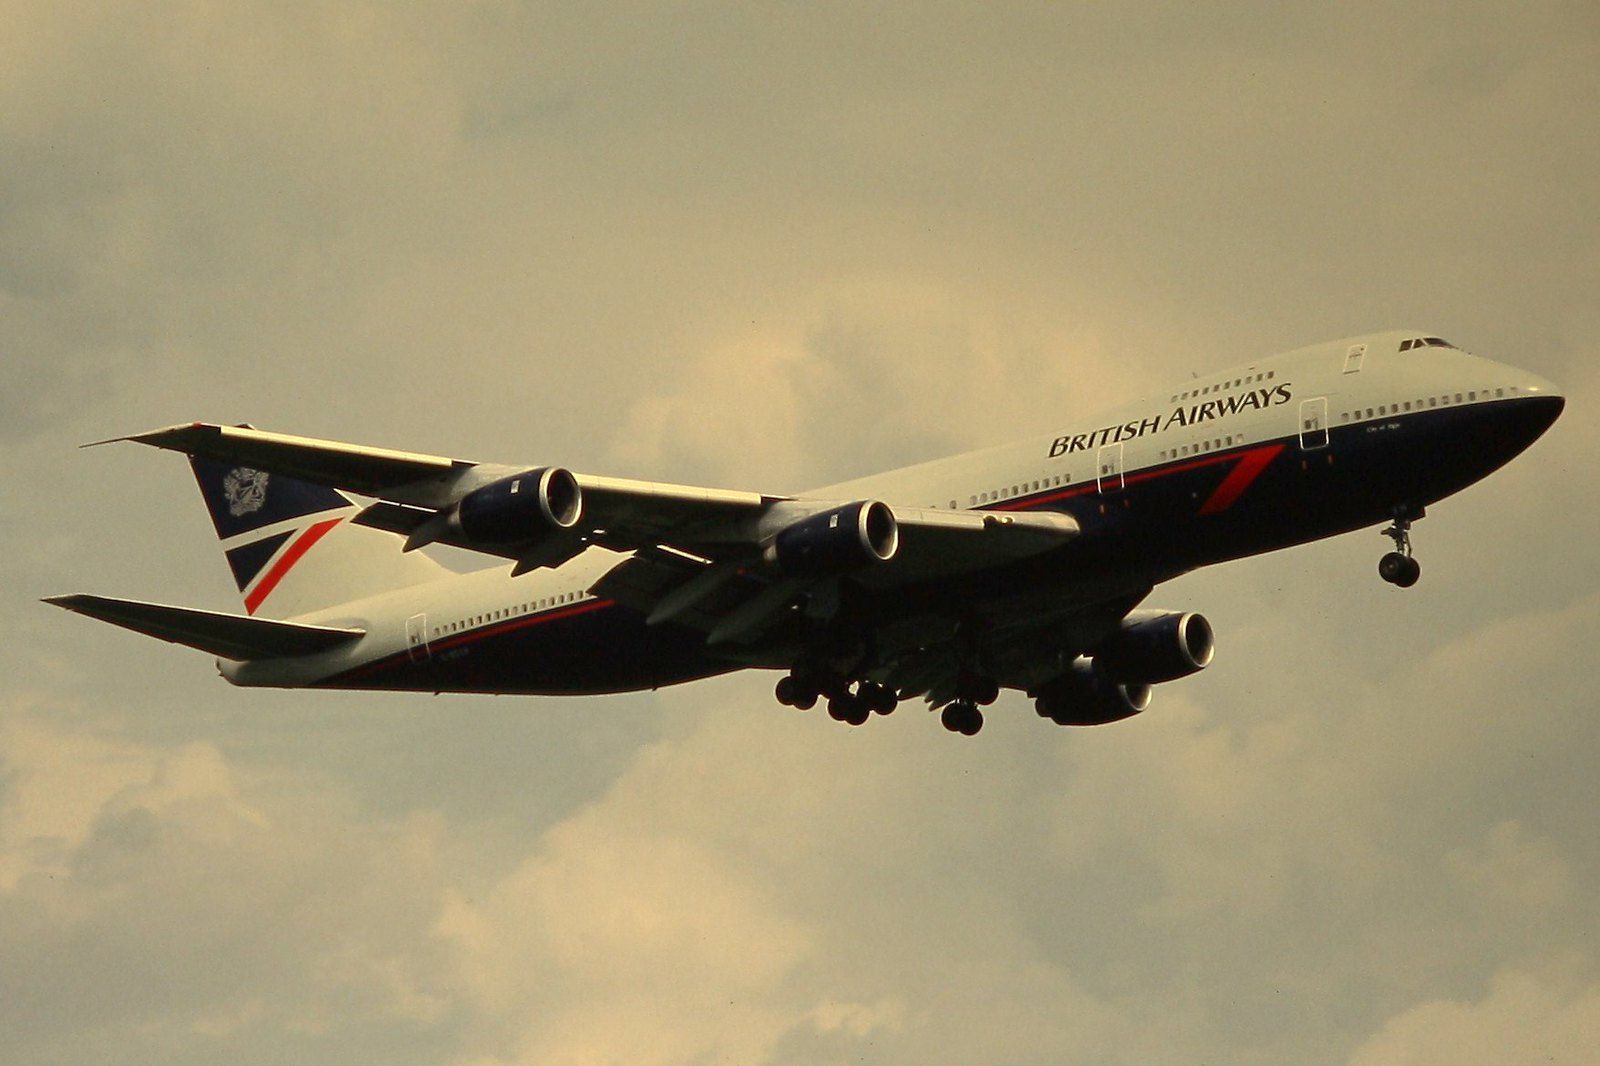 A British Airways Boeing 747-200 Flying in the sky.